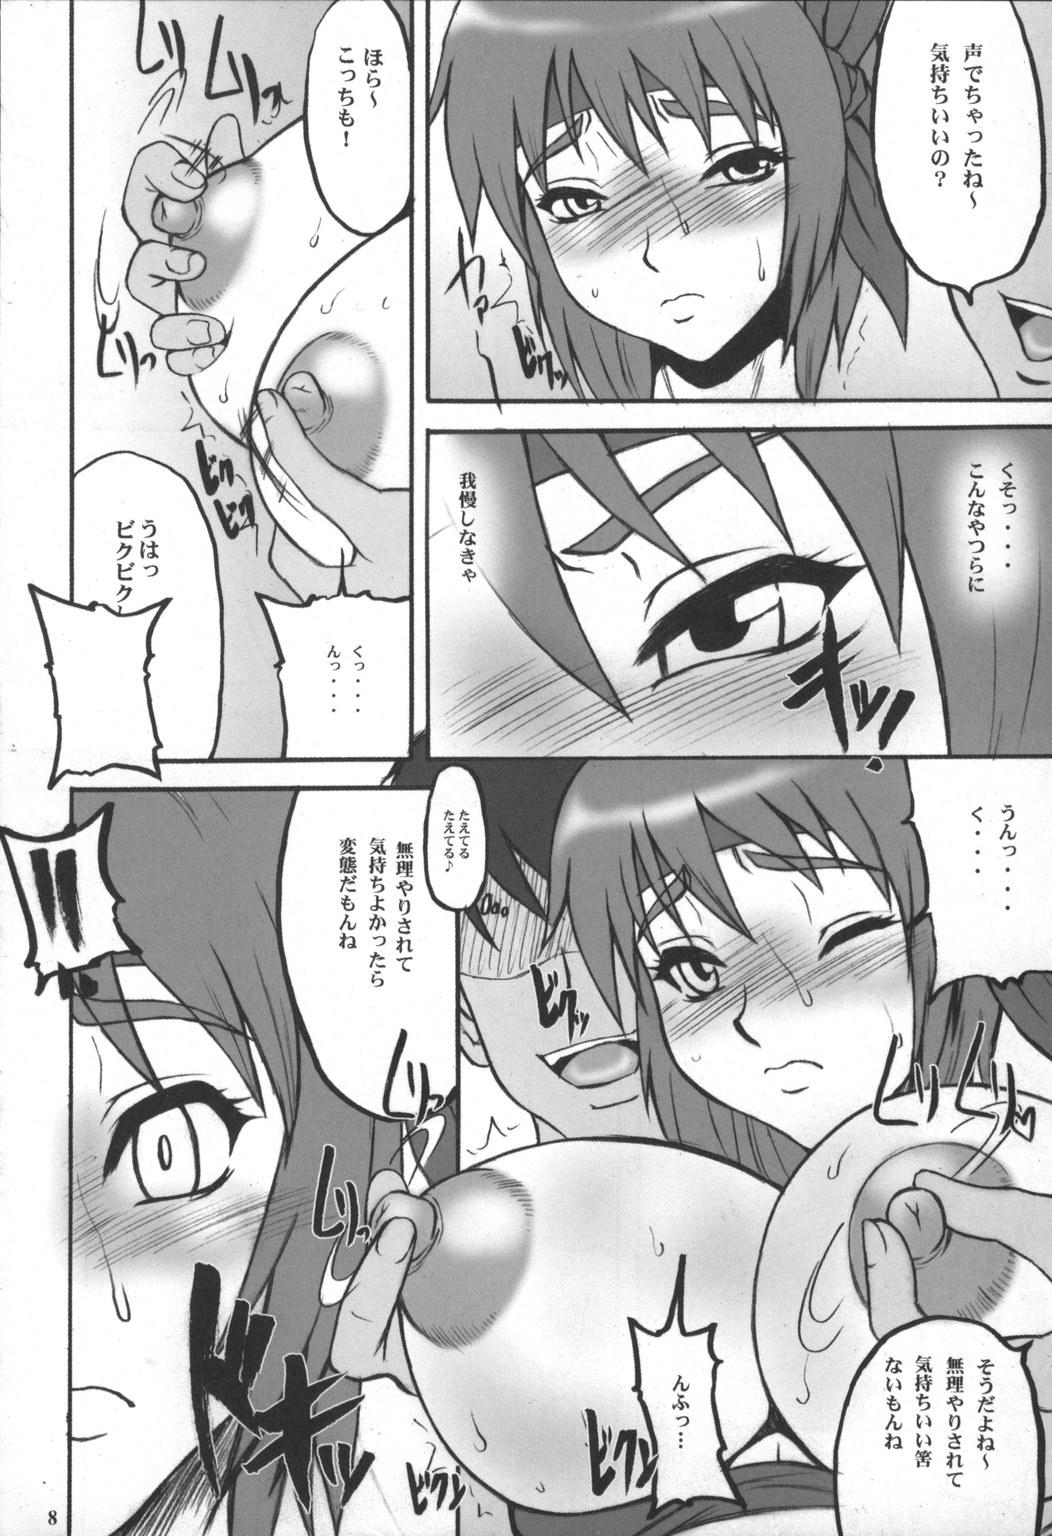 Hung Kaku Musume 7 - Dead or alive Reversecowgirl - Page 7